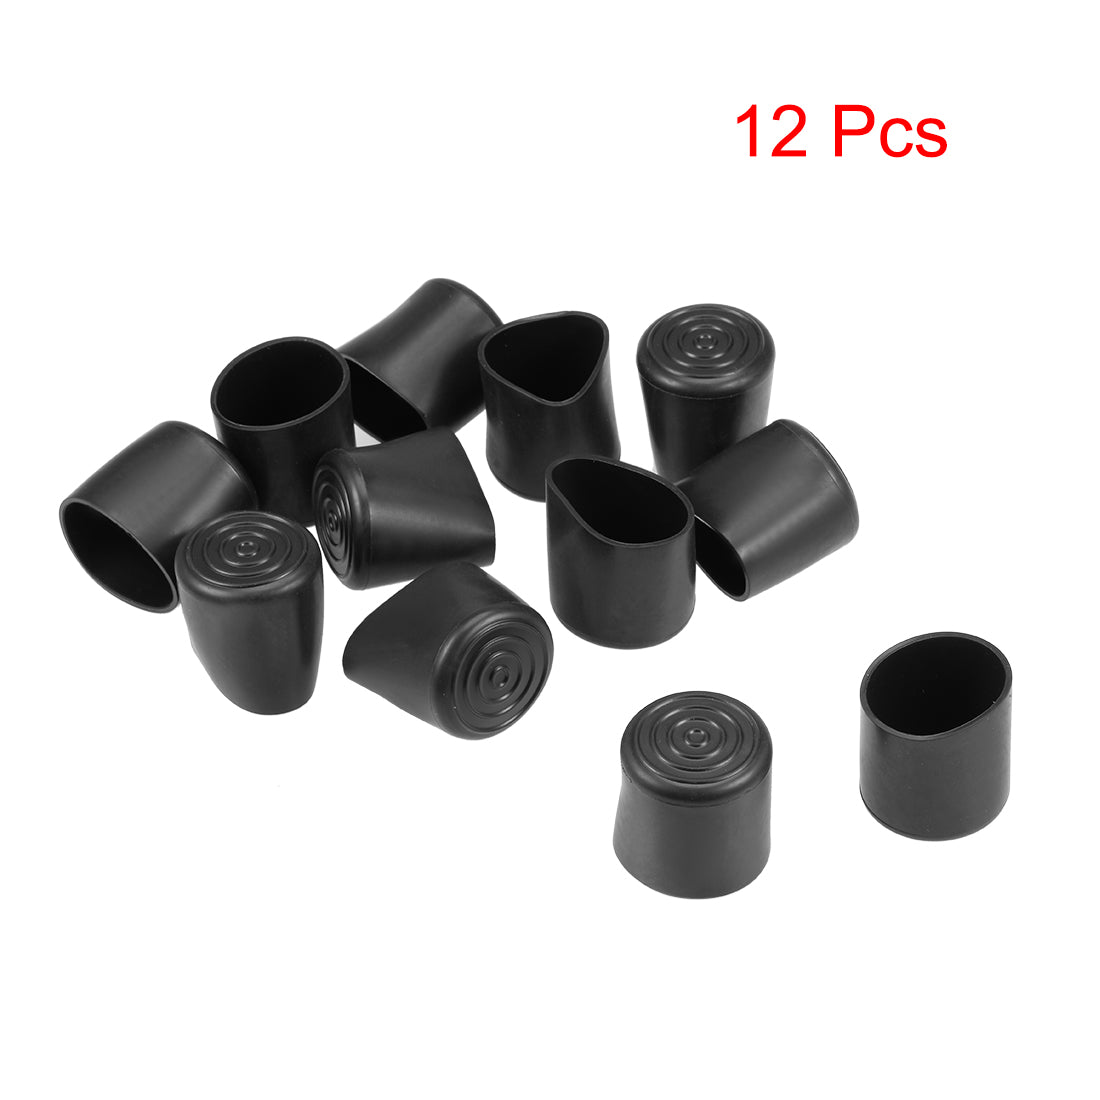 uxcell Uxcell Rubber Furniture Caps 25mm Inner Diameter Round Table Chair Legs Covers 12Pcs